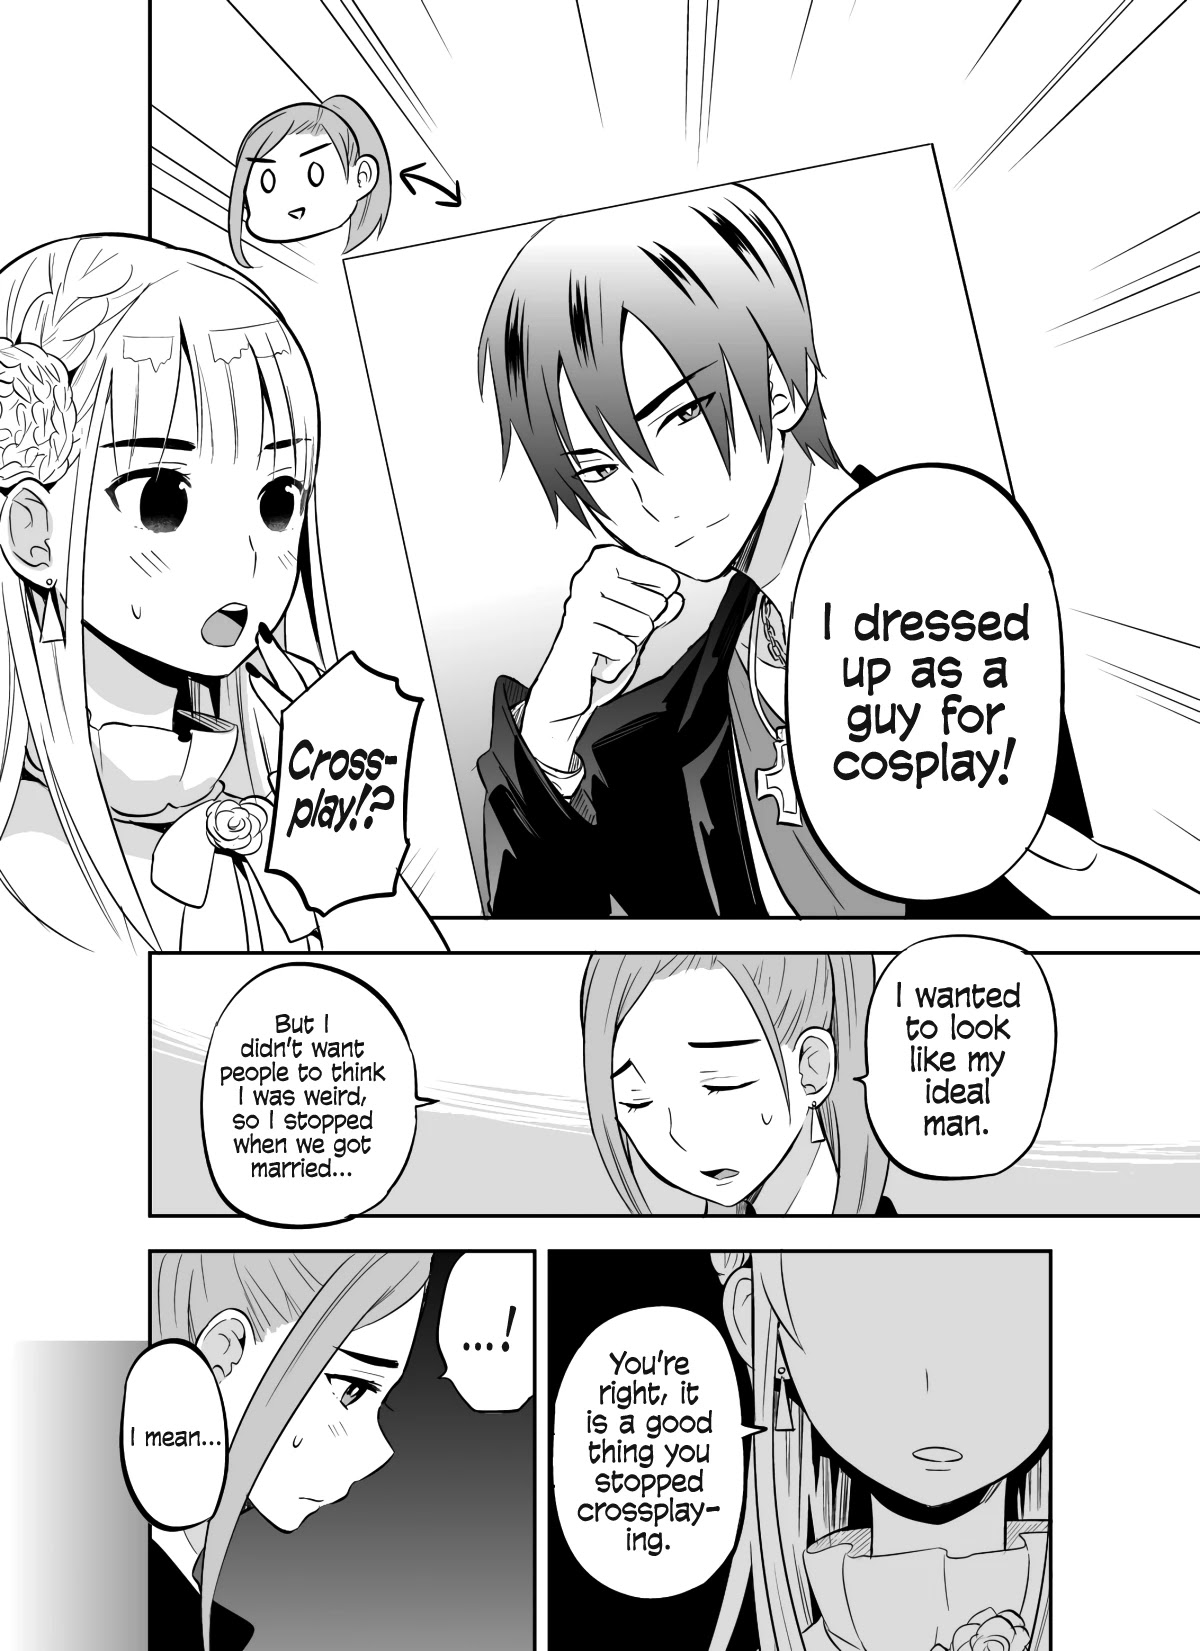 The Story Of My Husband's Cute Crossdressing - Page 2